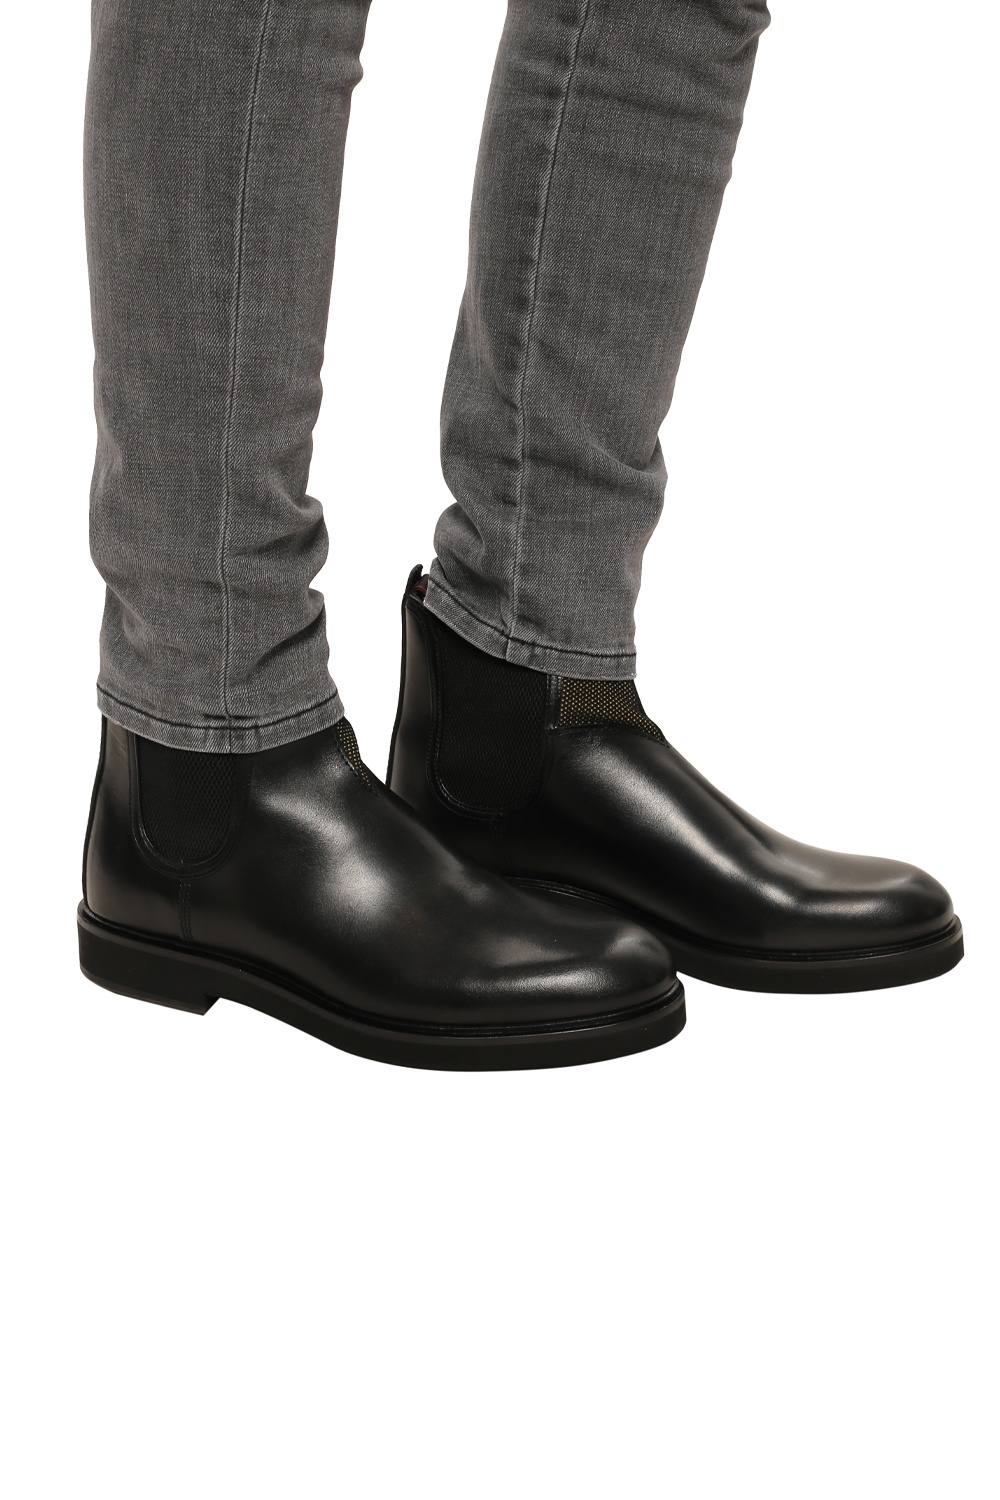 paul smith ankle boots